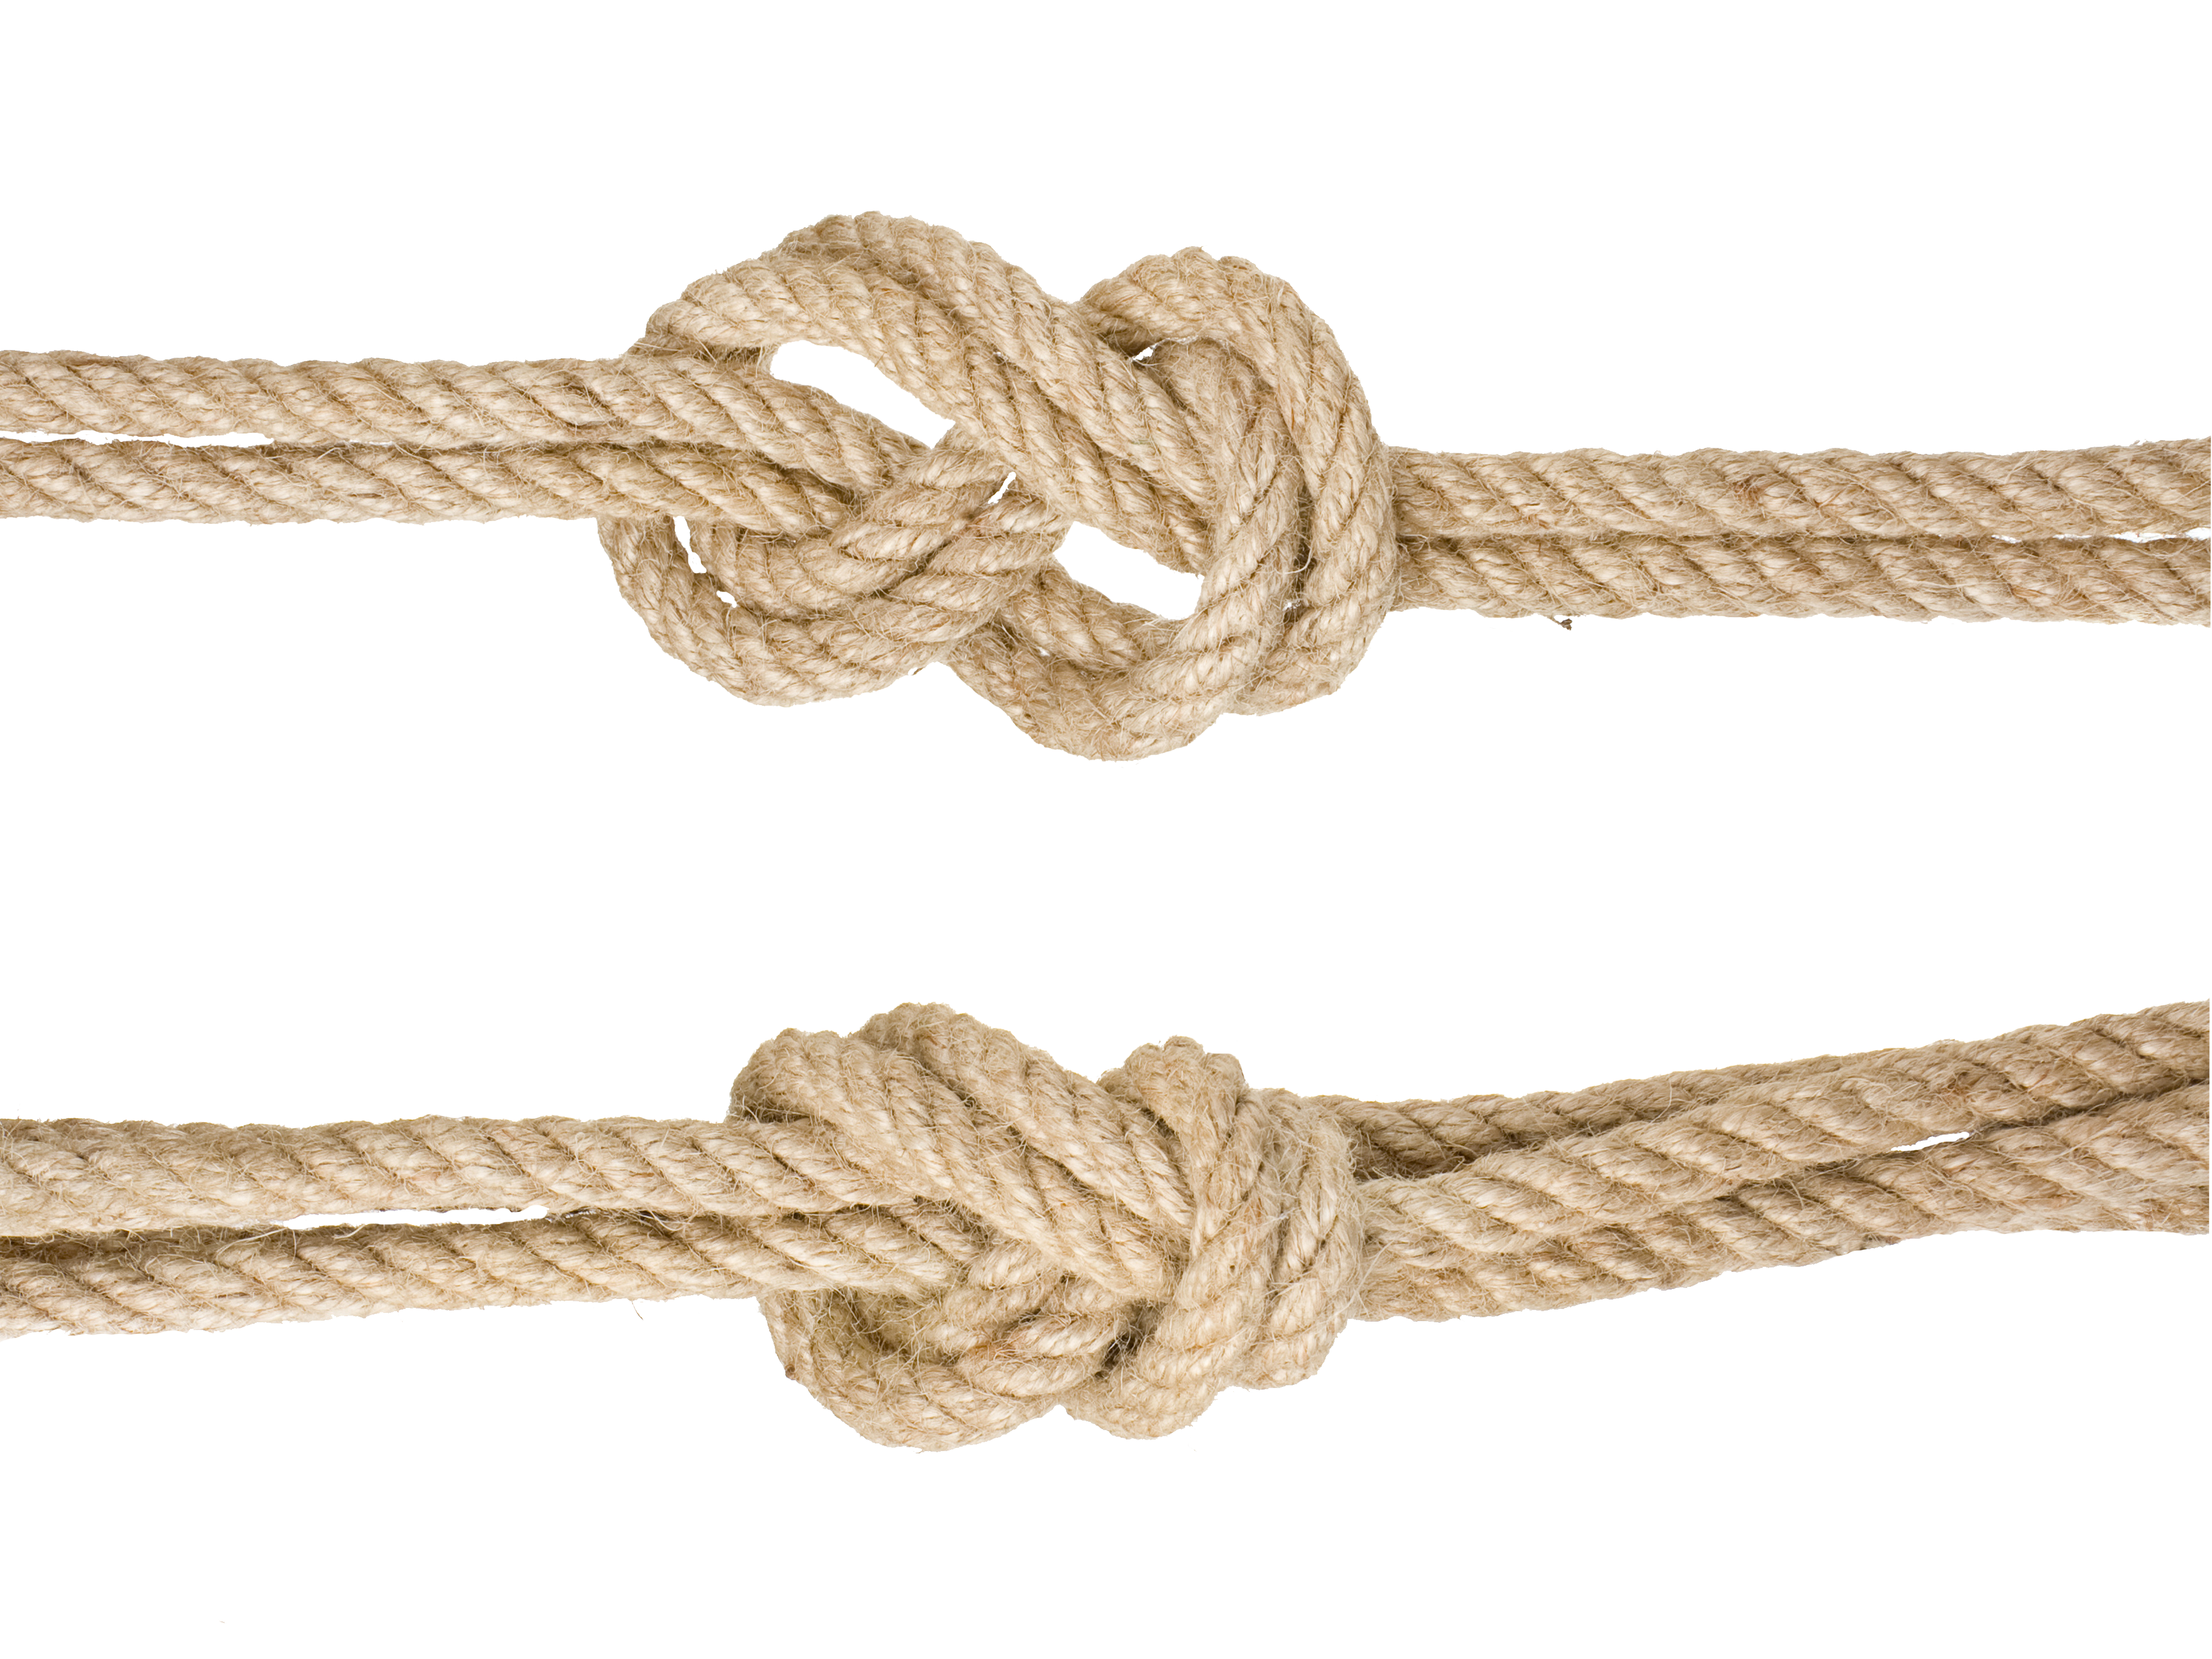 Download Google Knotted Rope Knot Images Hemp HQ PNG Image